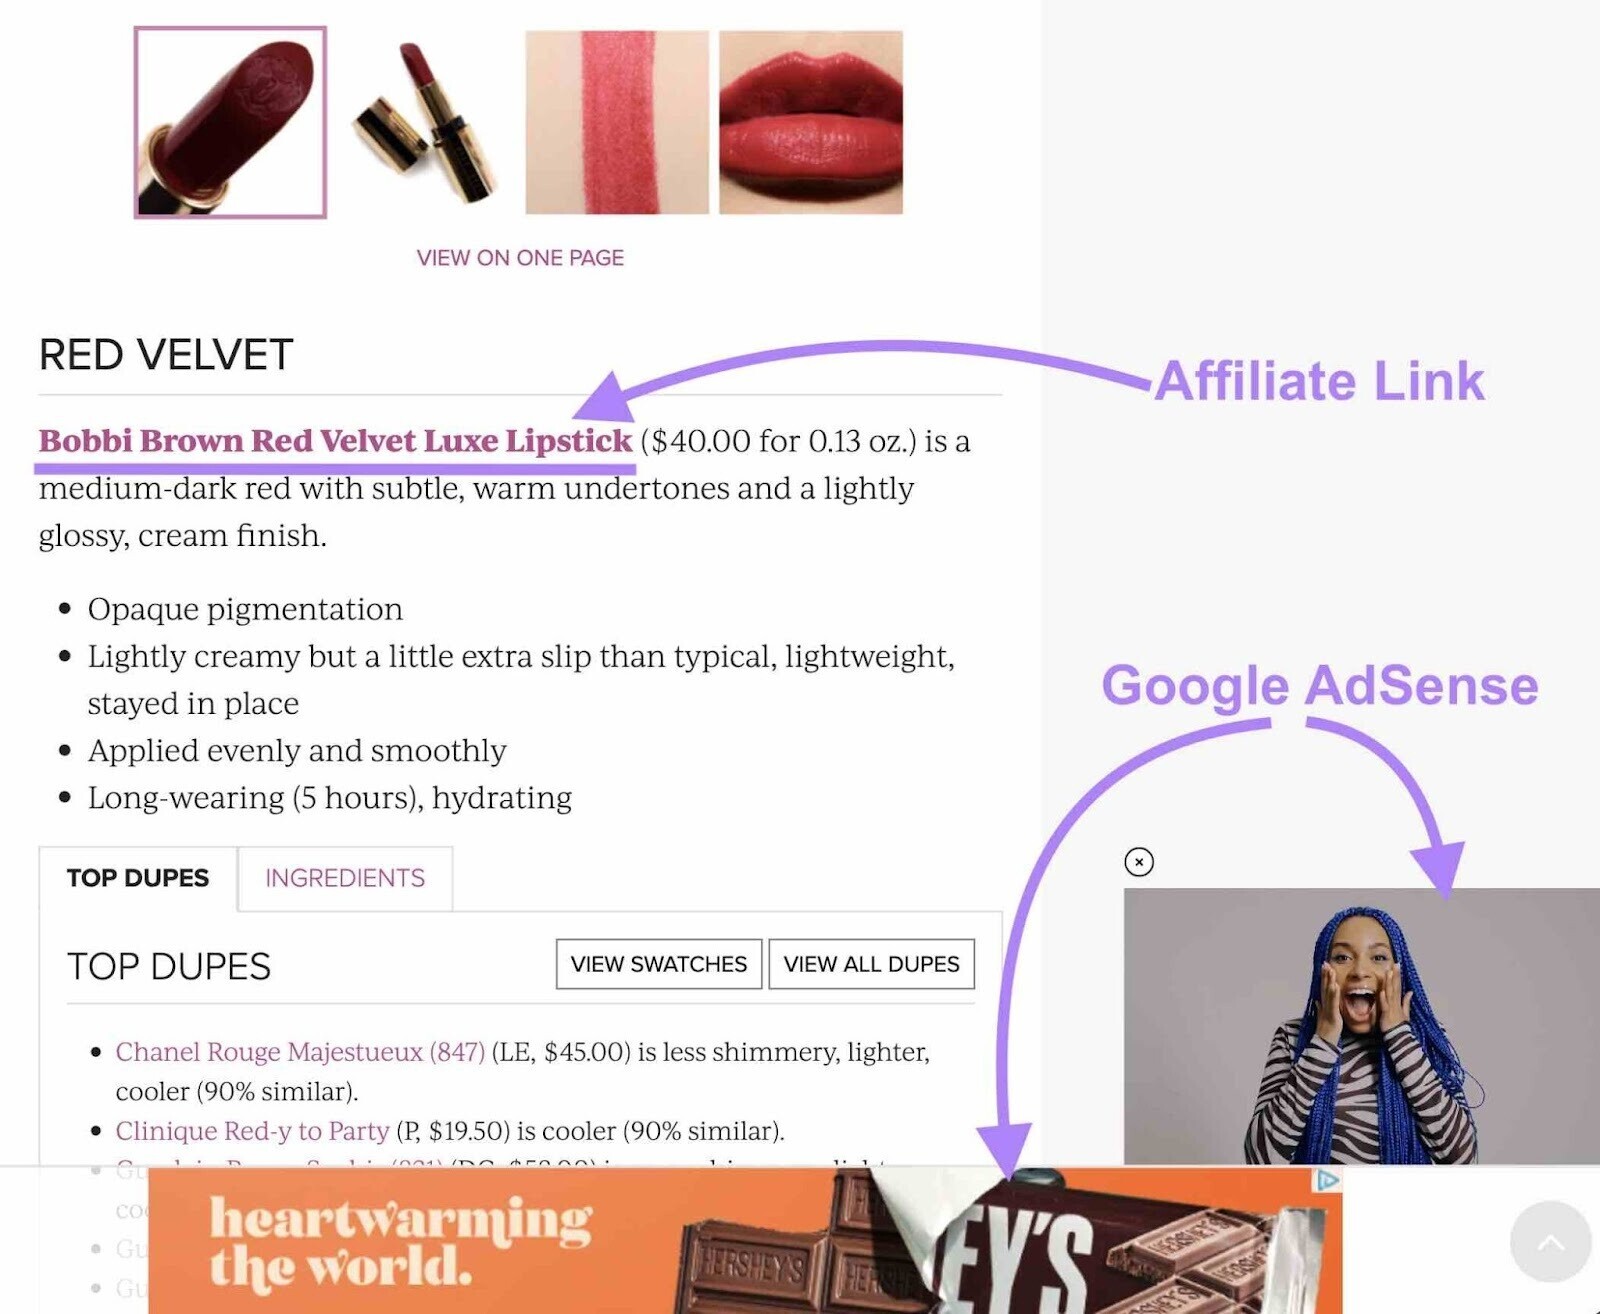 affiliate marketing and advertisingm on a beauty blog